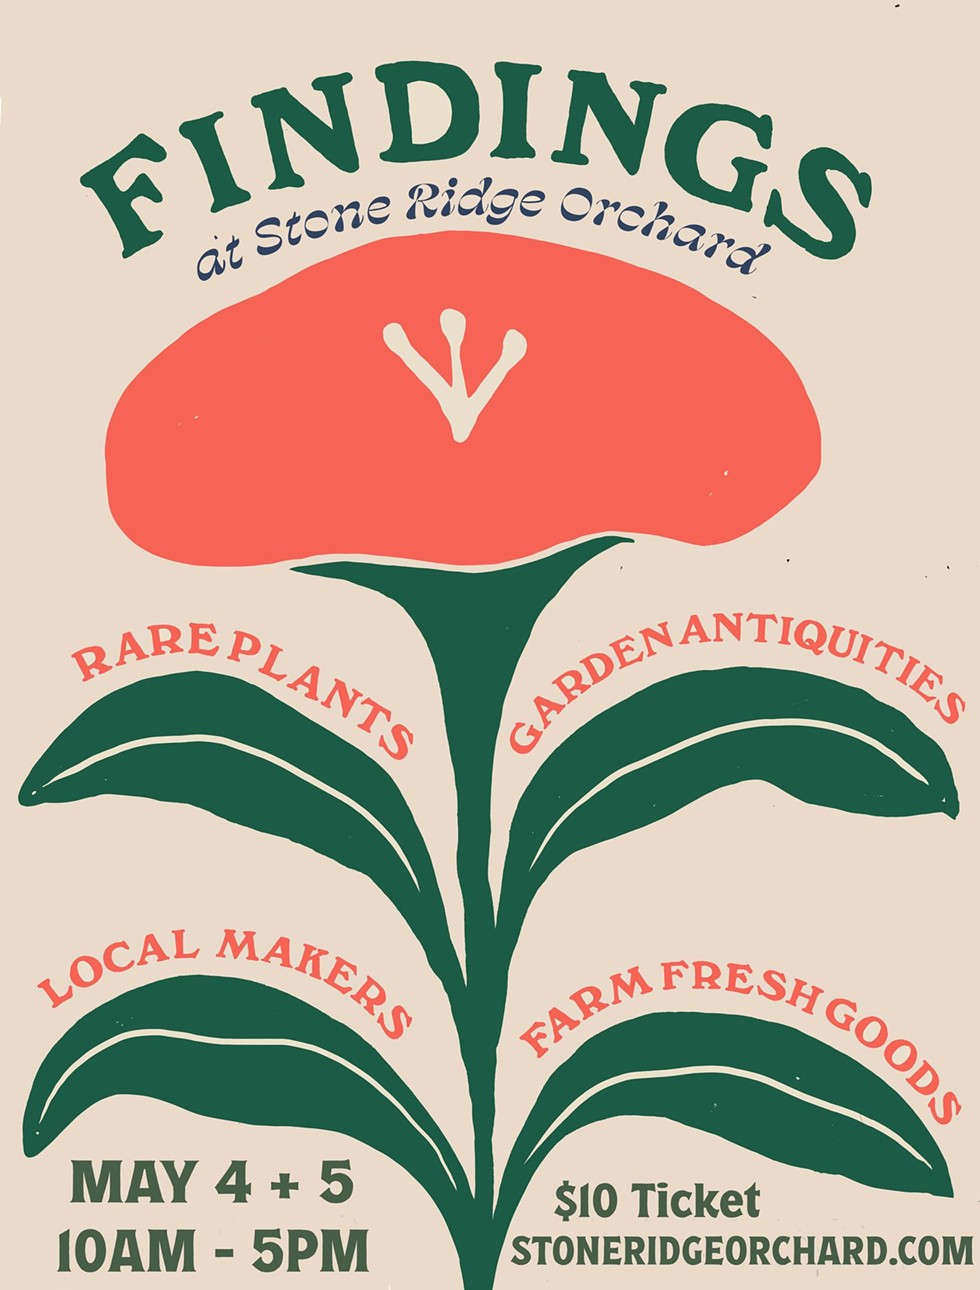 Elizabeth Ryan of Hudson Valley Farmhouse Cider &amp; Stone Ridge Orchard Presents the 4 th annual Spring FINDINGS